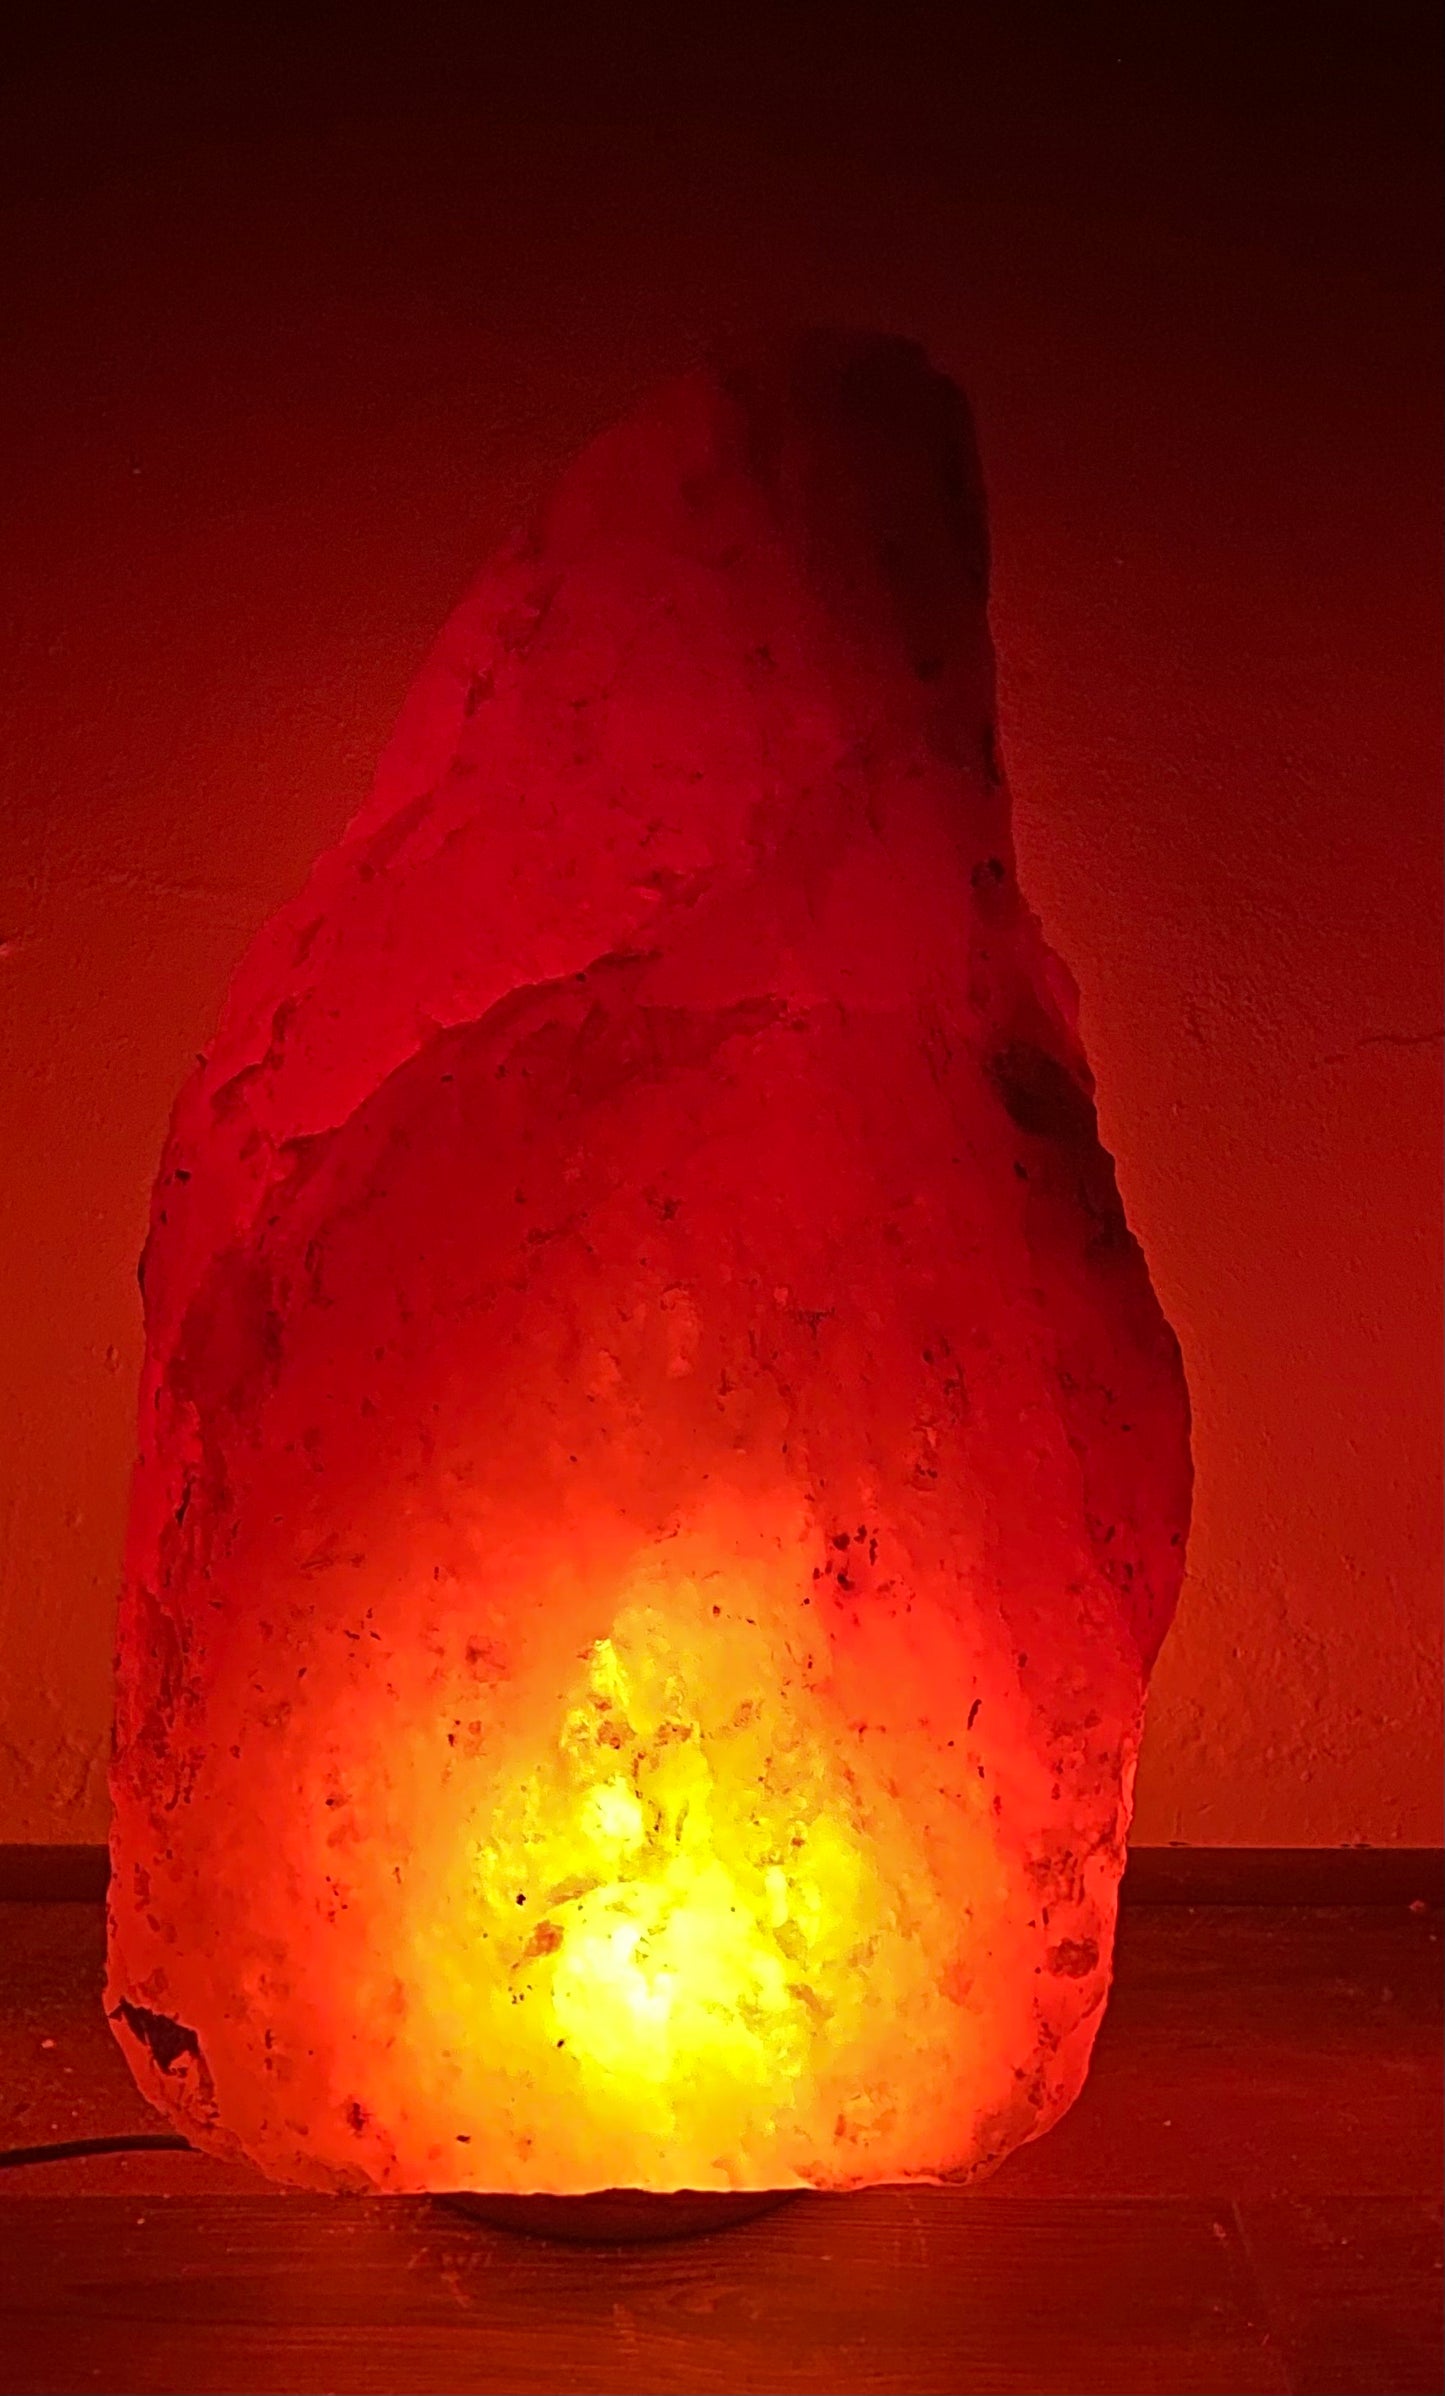 XXL Himalayan Salt Lamp 96kg - Delivery Free within South Africa